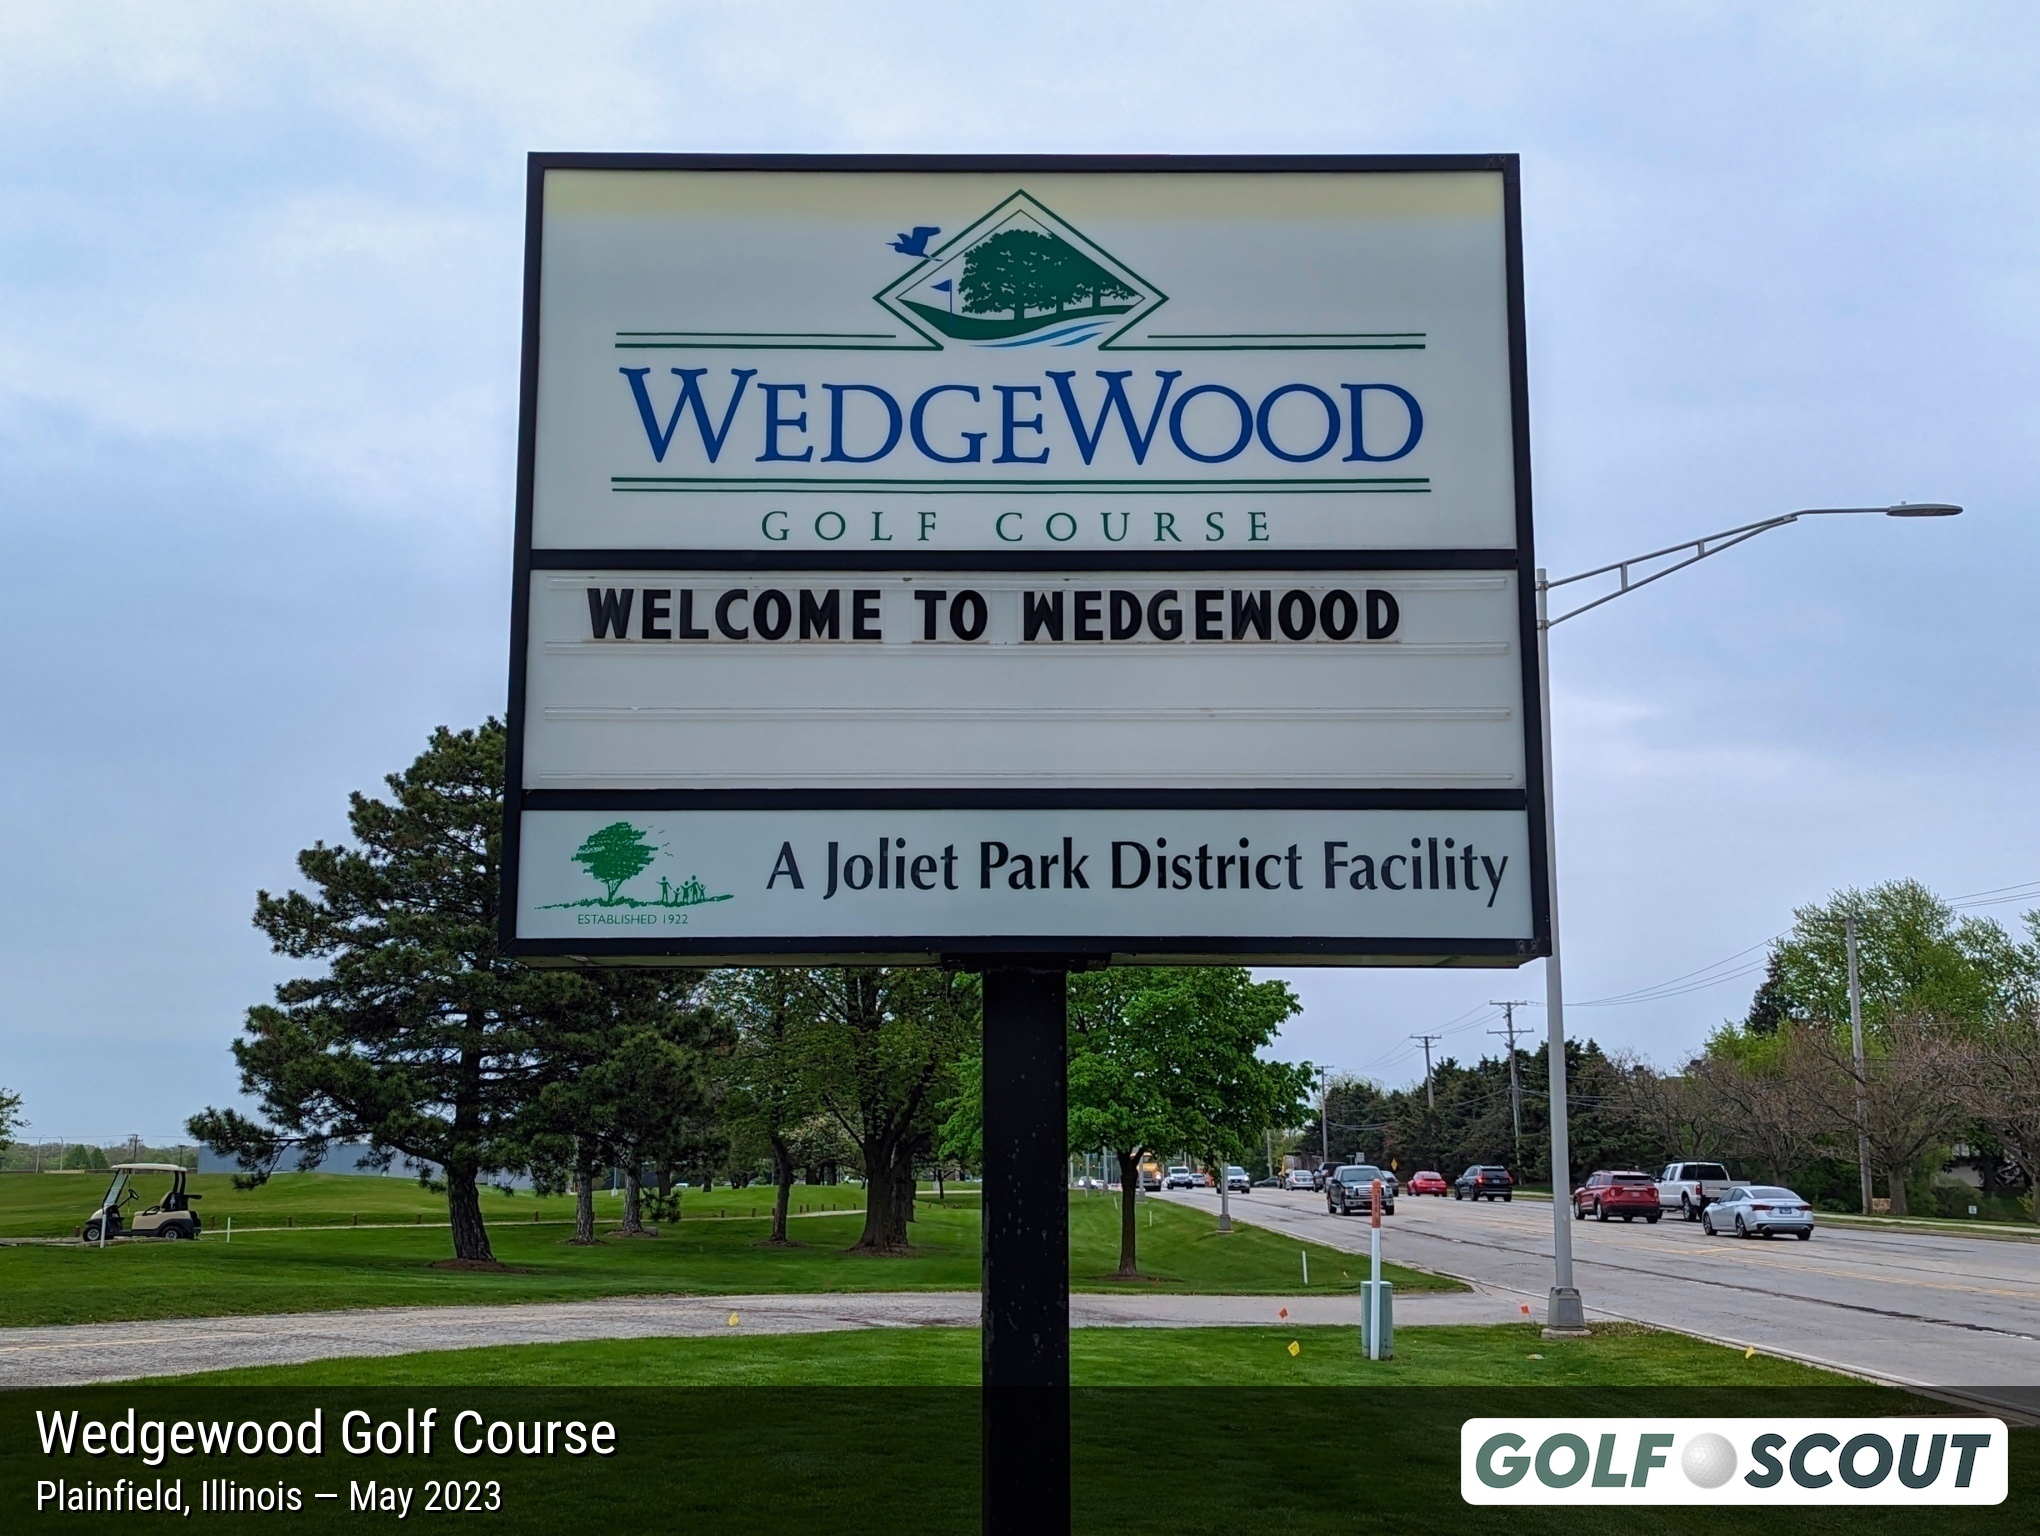 Sign at the entrance to Wedgewood Golf Course